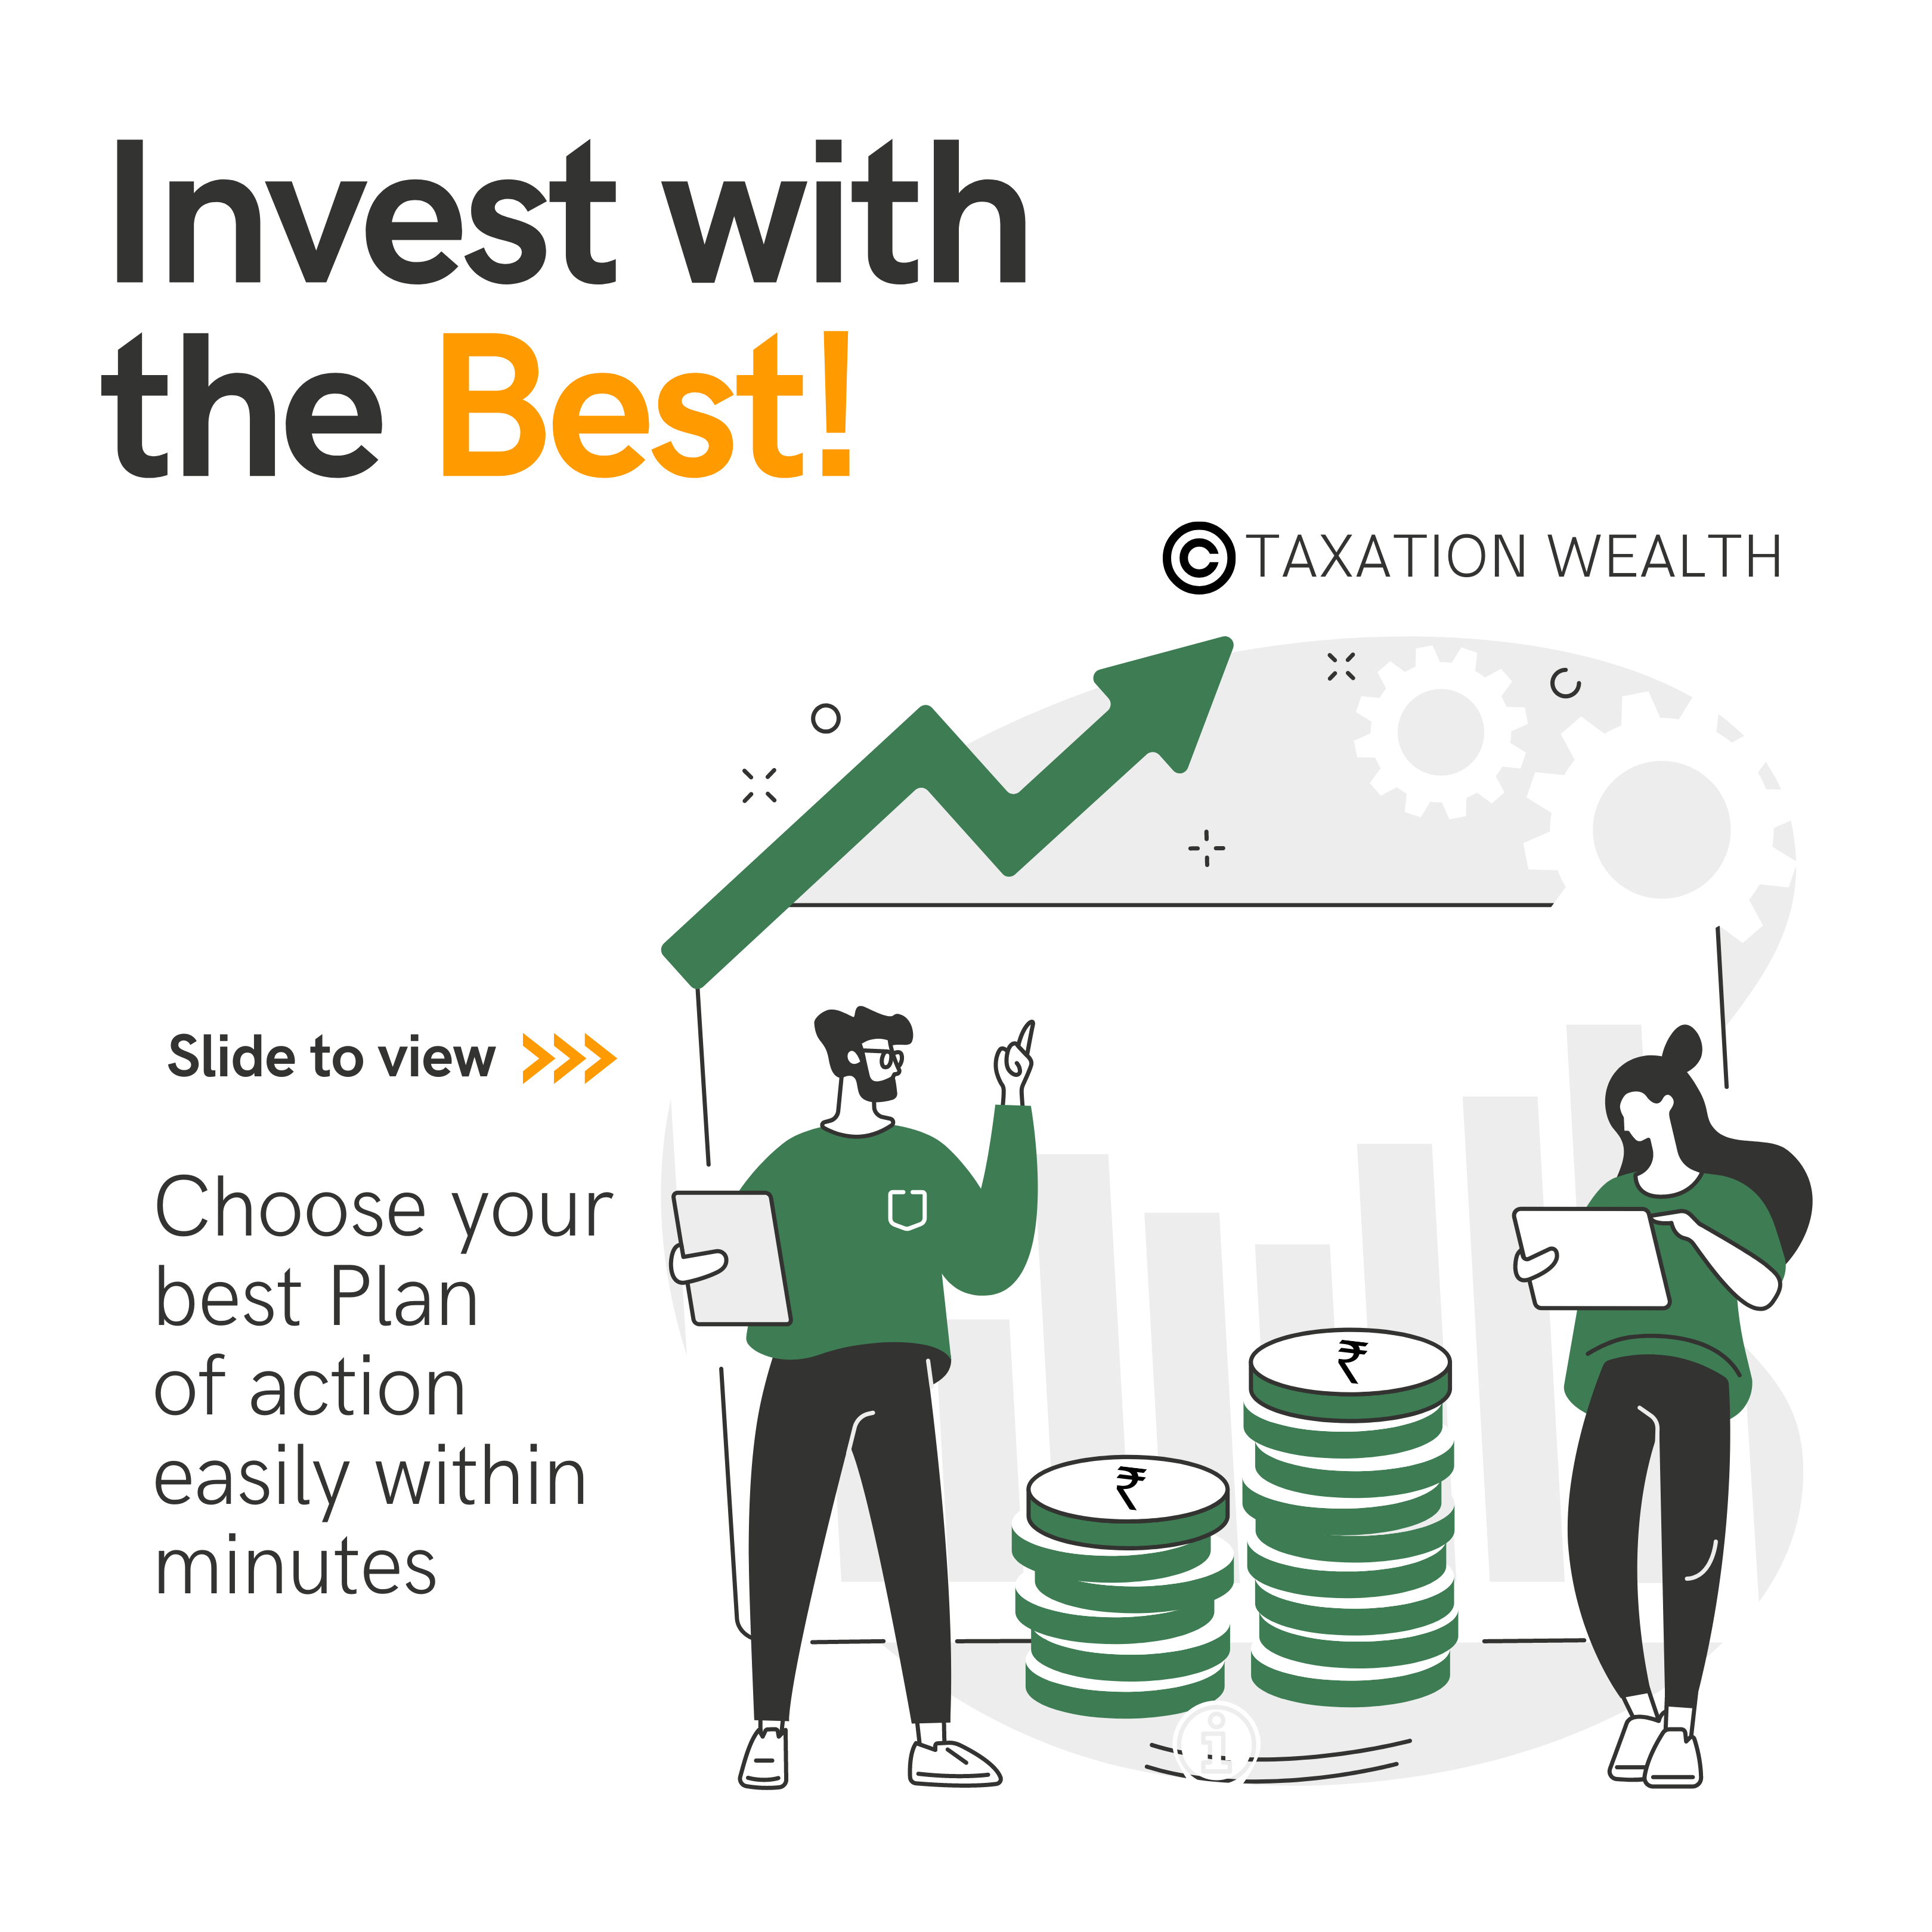 Invest with the Best - Taxation wealth